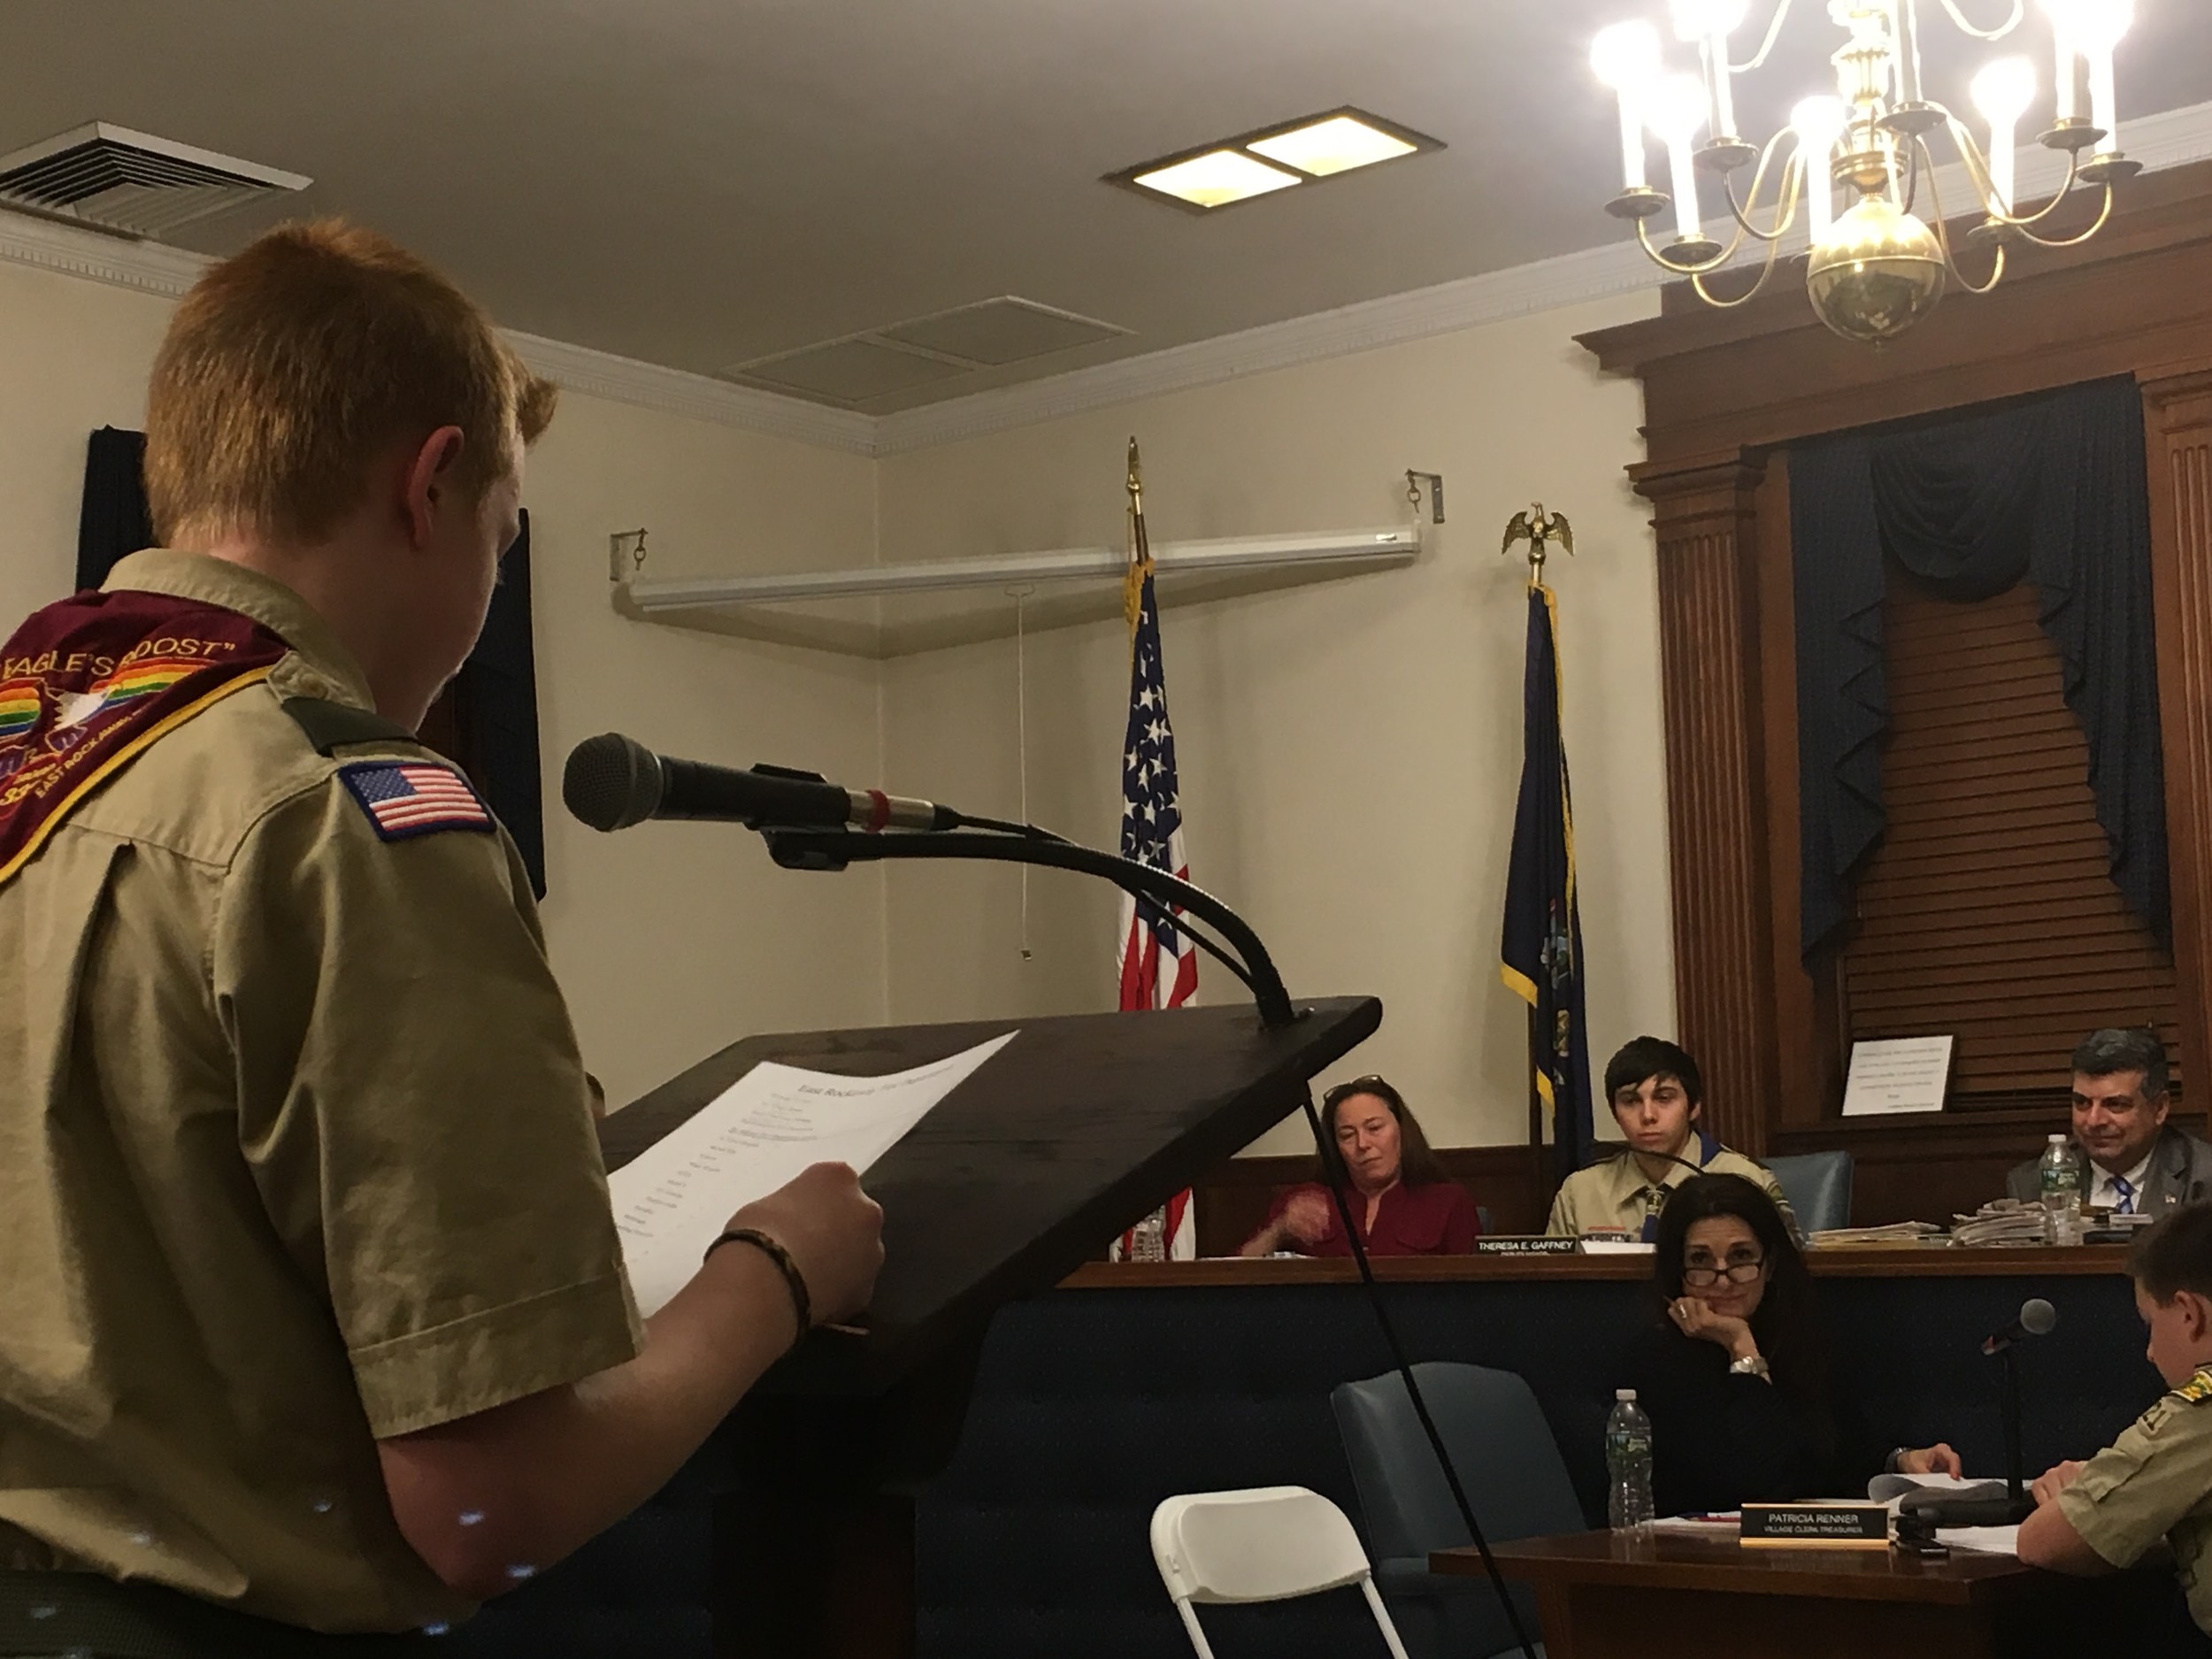 Brooks Honerkamp, 13, presented the East Rockaway Fire Department’s report to his older brother Frankie, 16, who was portraying the mayor.